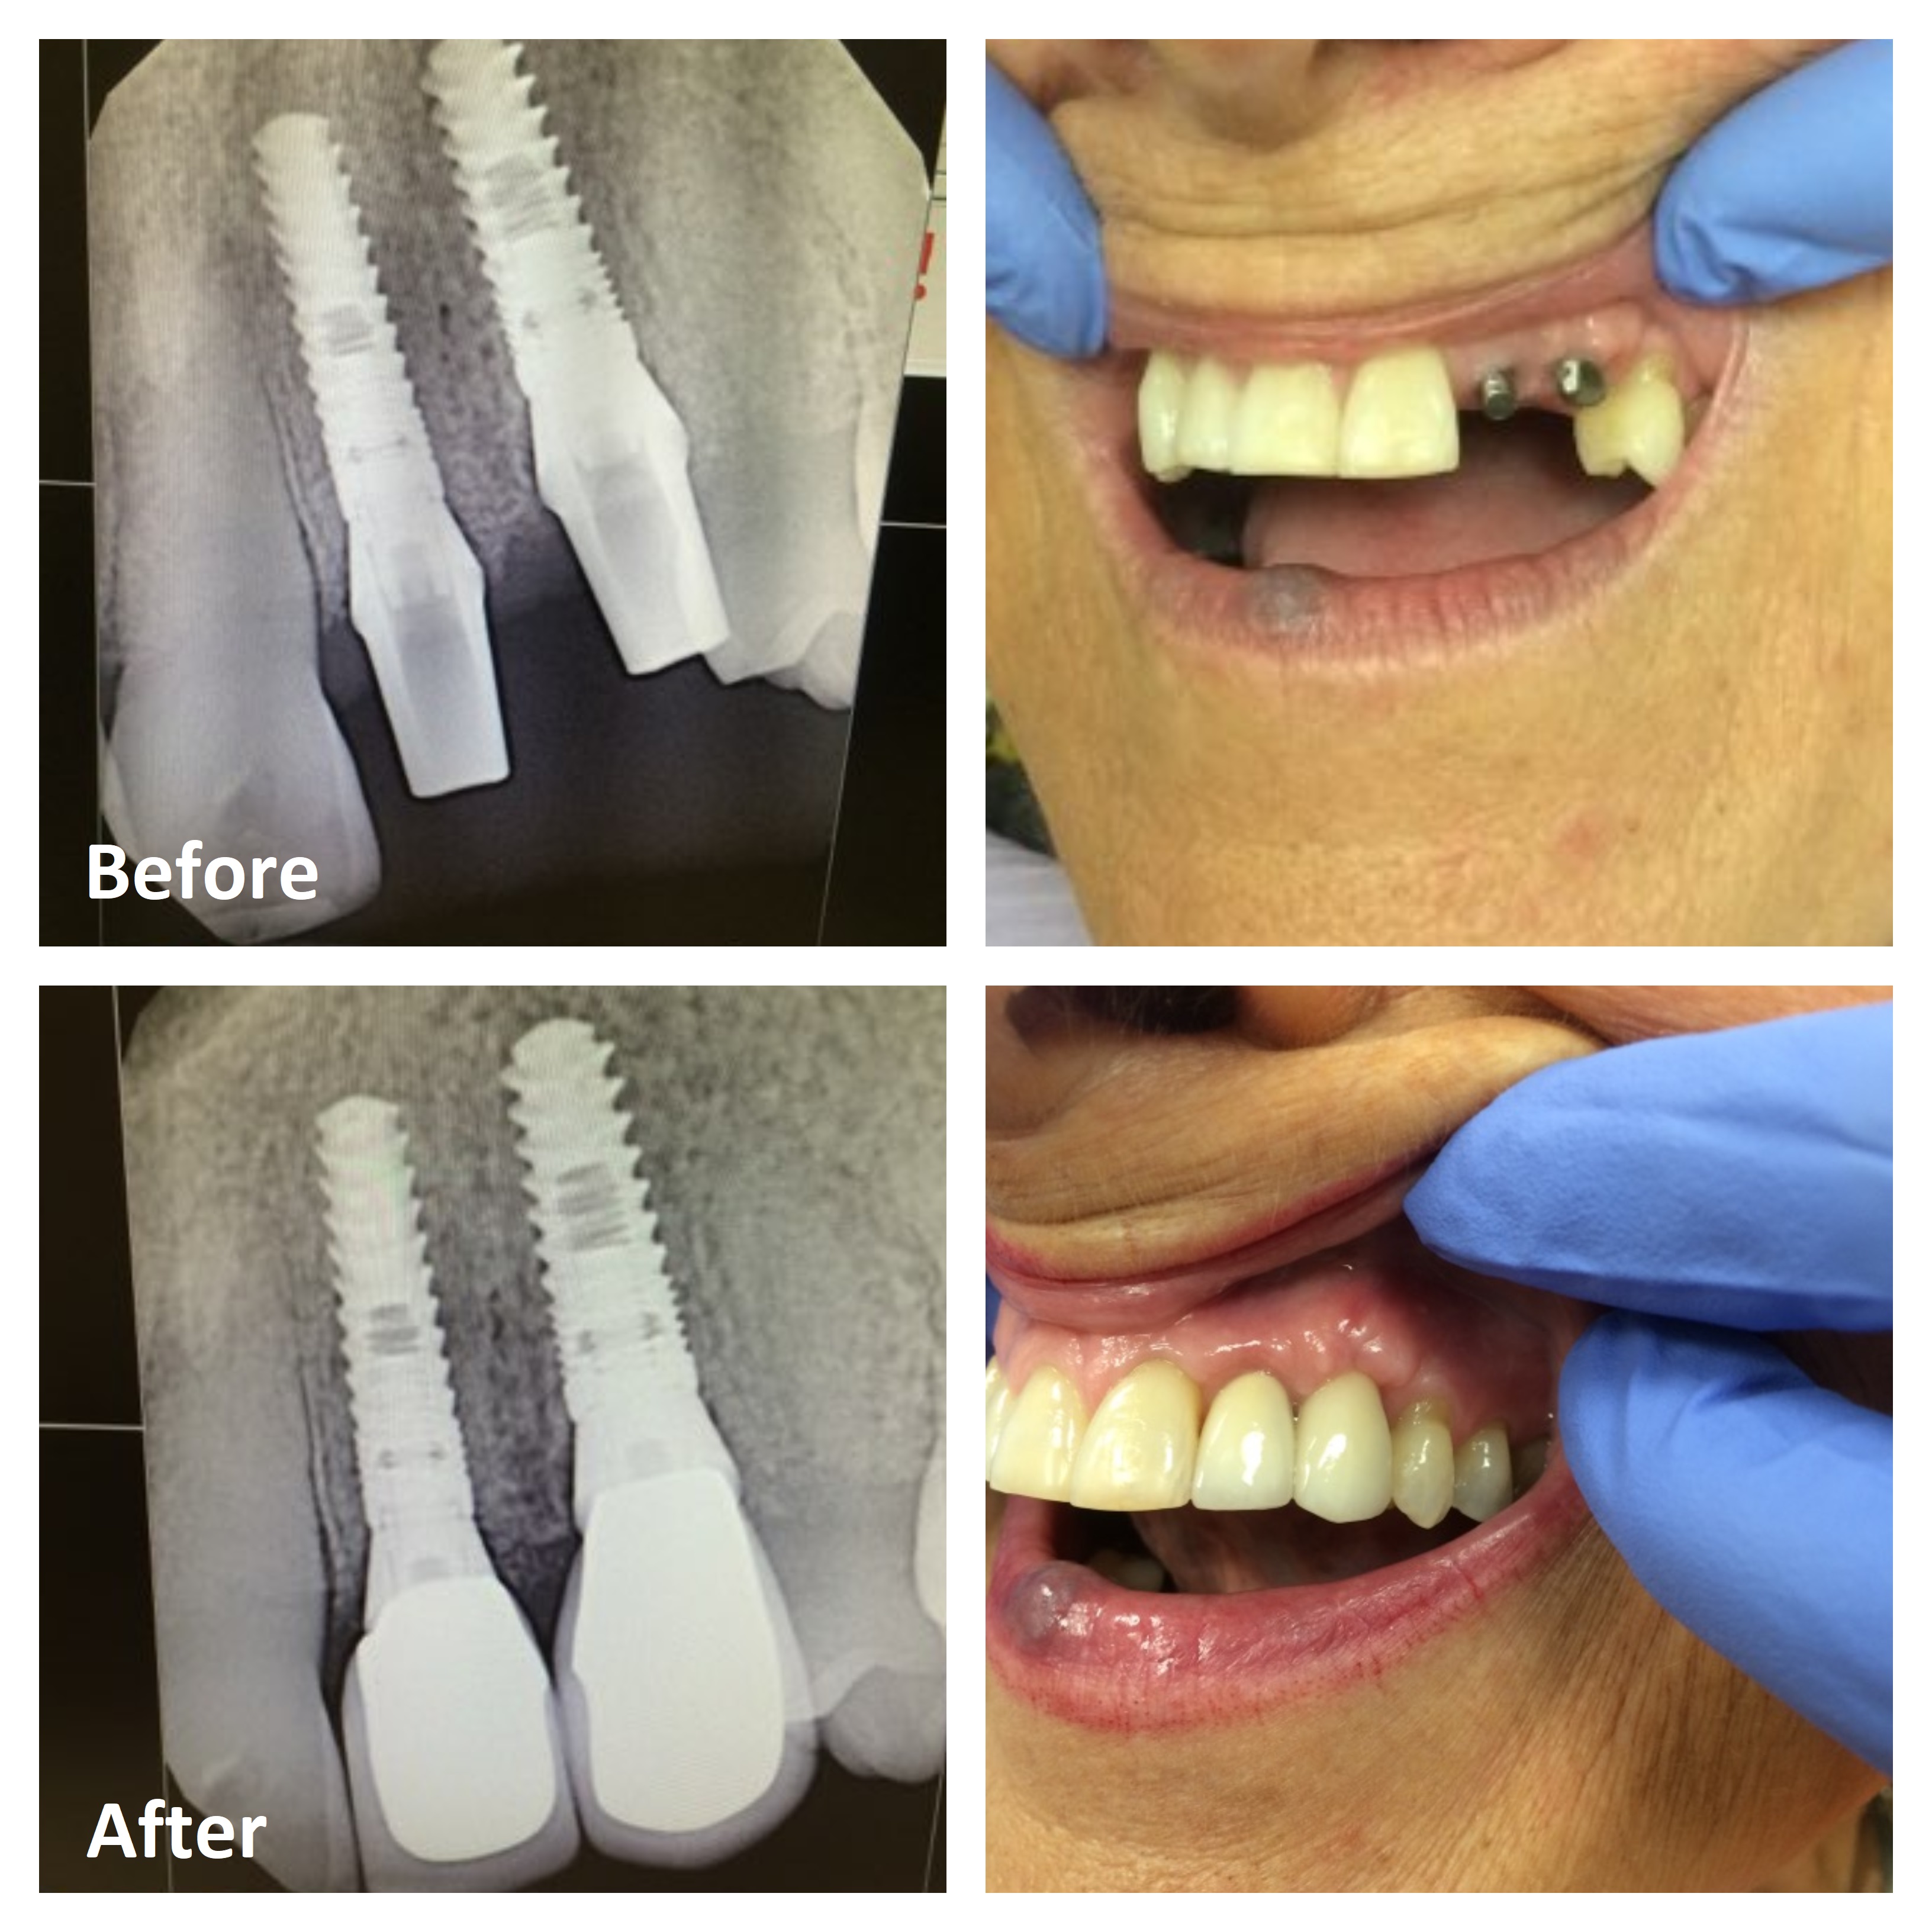 Dental Implant Pictures Before and After | Implant Dentist Ottawa